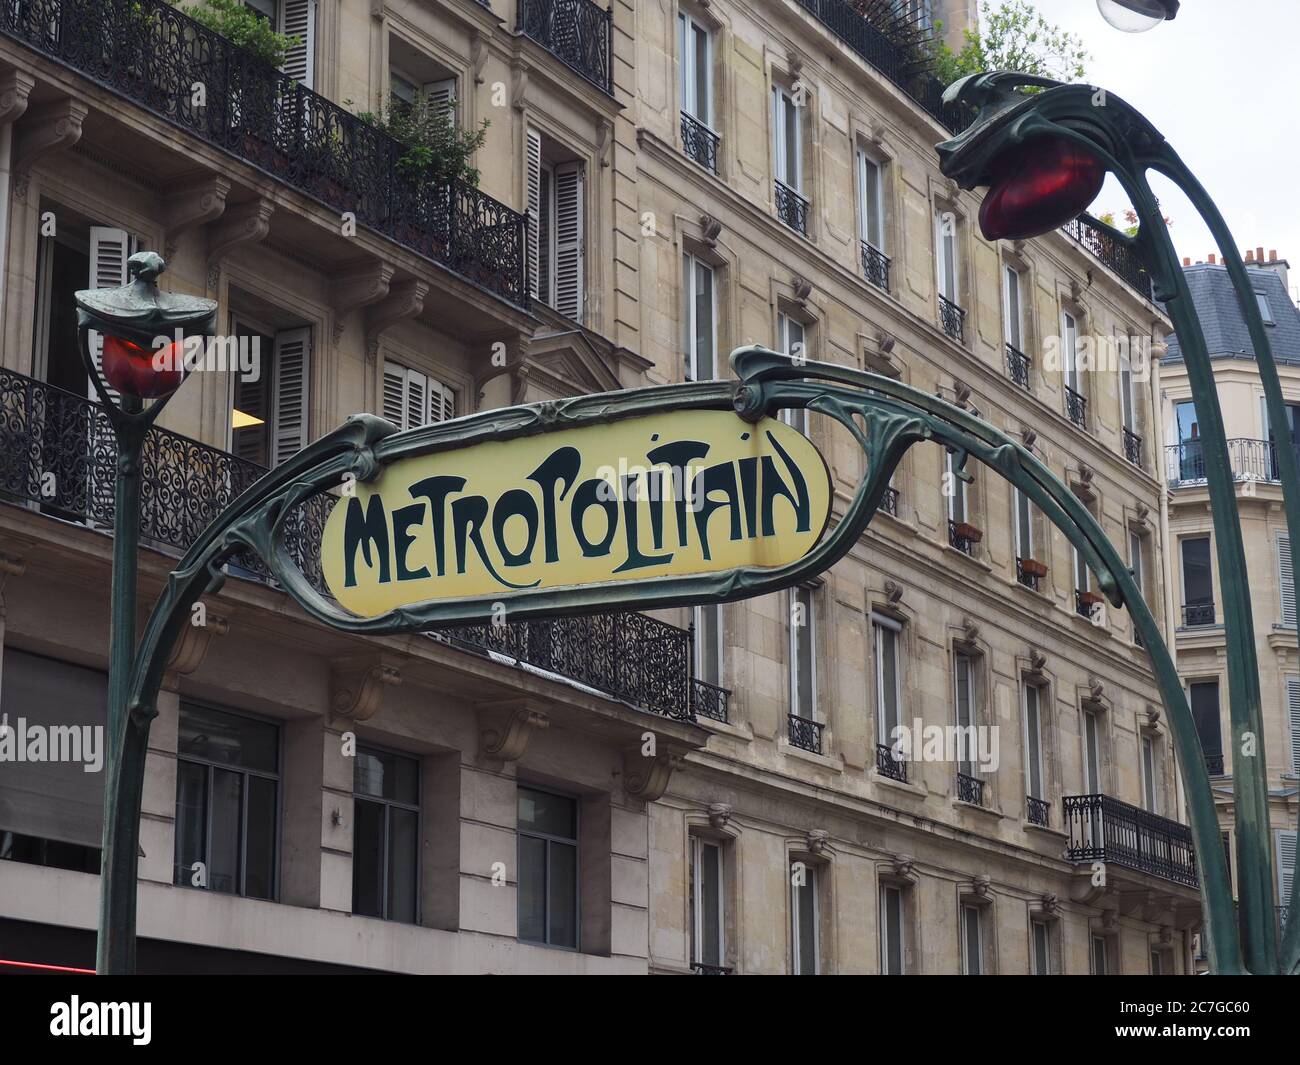 Paris, France. 16th July, 2020. An entrance to the Châtelet Métro station  in Paris in Art Nouveau style. July 19 will mark the 120th anniversary of  the opening of the first métro